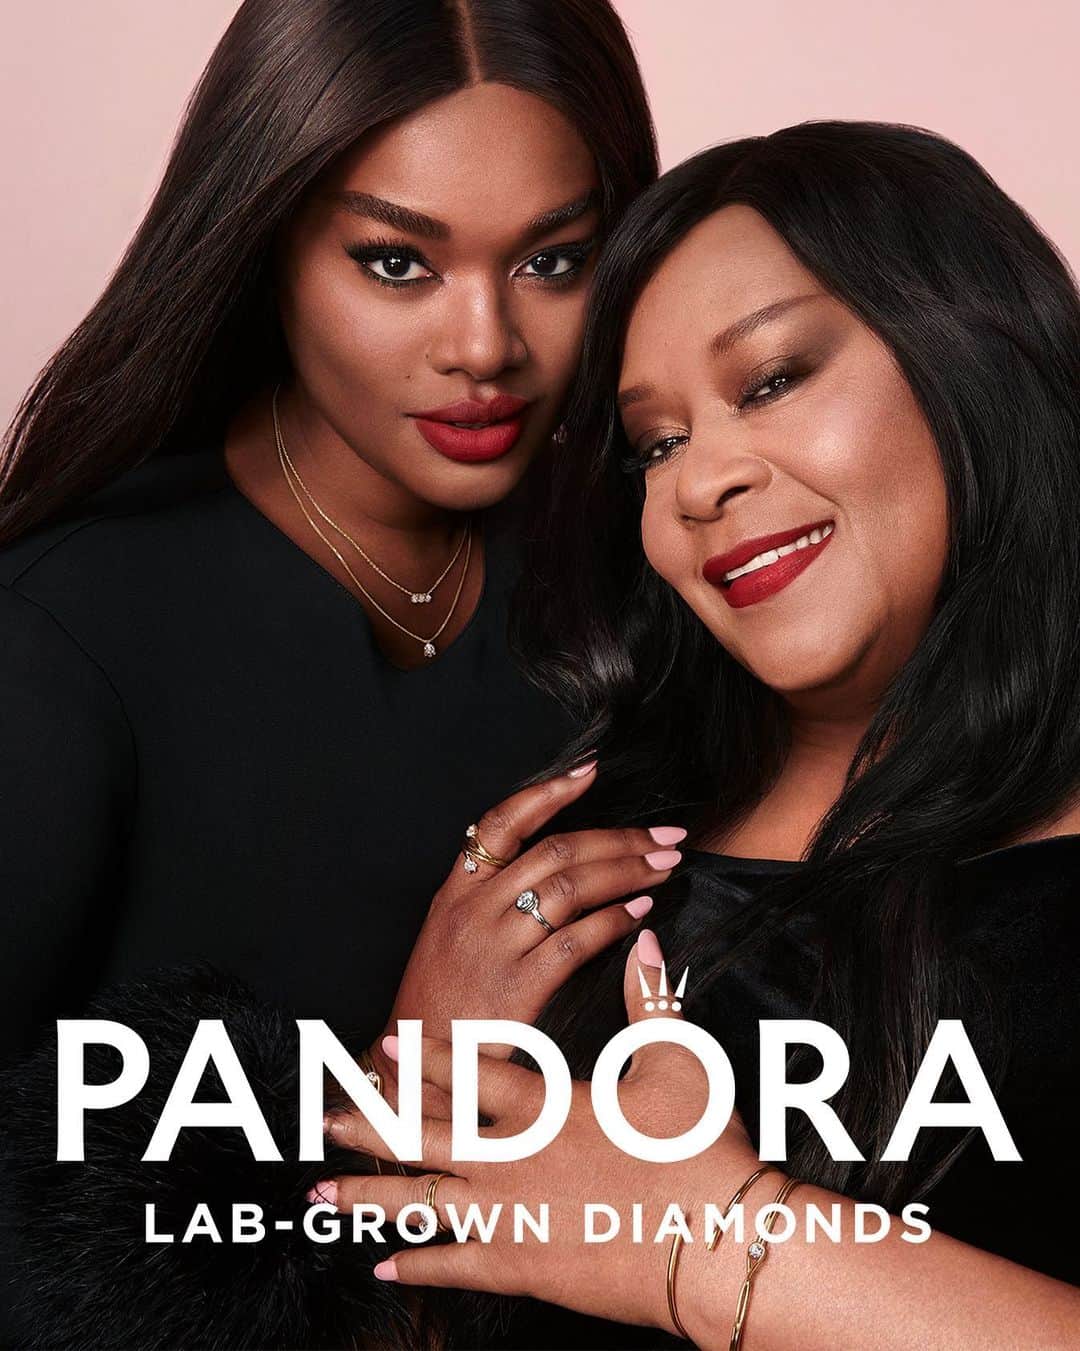 PANDORAのインスタグラム：「Mum always makes the season bright. Now you can make her holiday sparkle with Pandora Lab-Grown Diamonds. Worn and loved by model and activist @preciousleexoxo and her radiant mother, Anita. 💎  #LovesUnboxed #LabGrownDiamonds #Pandora」